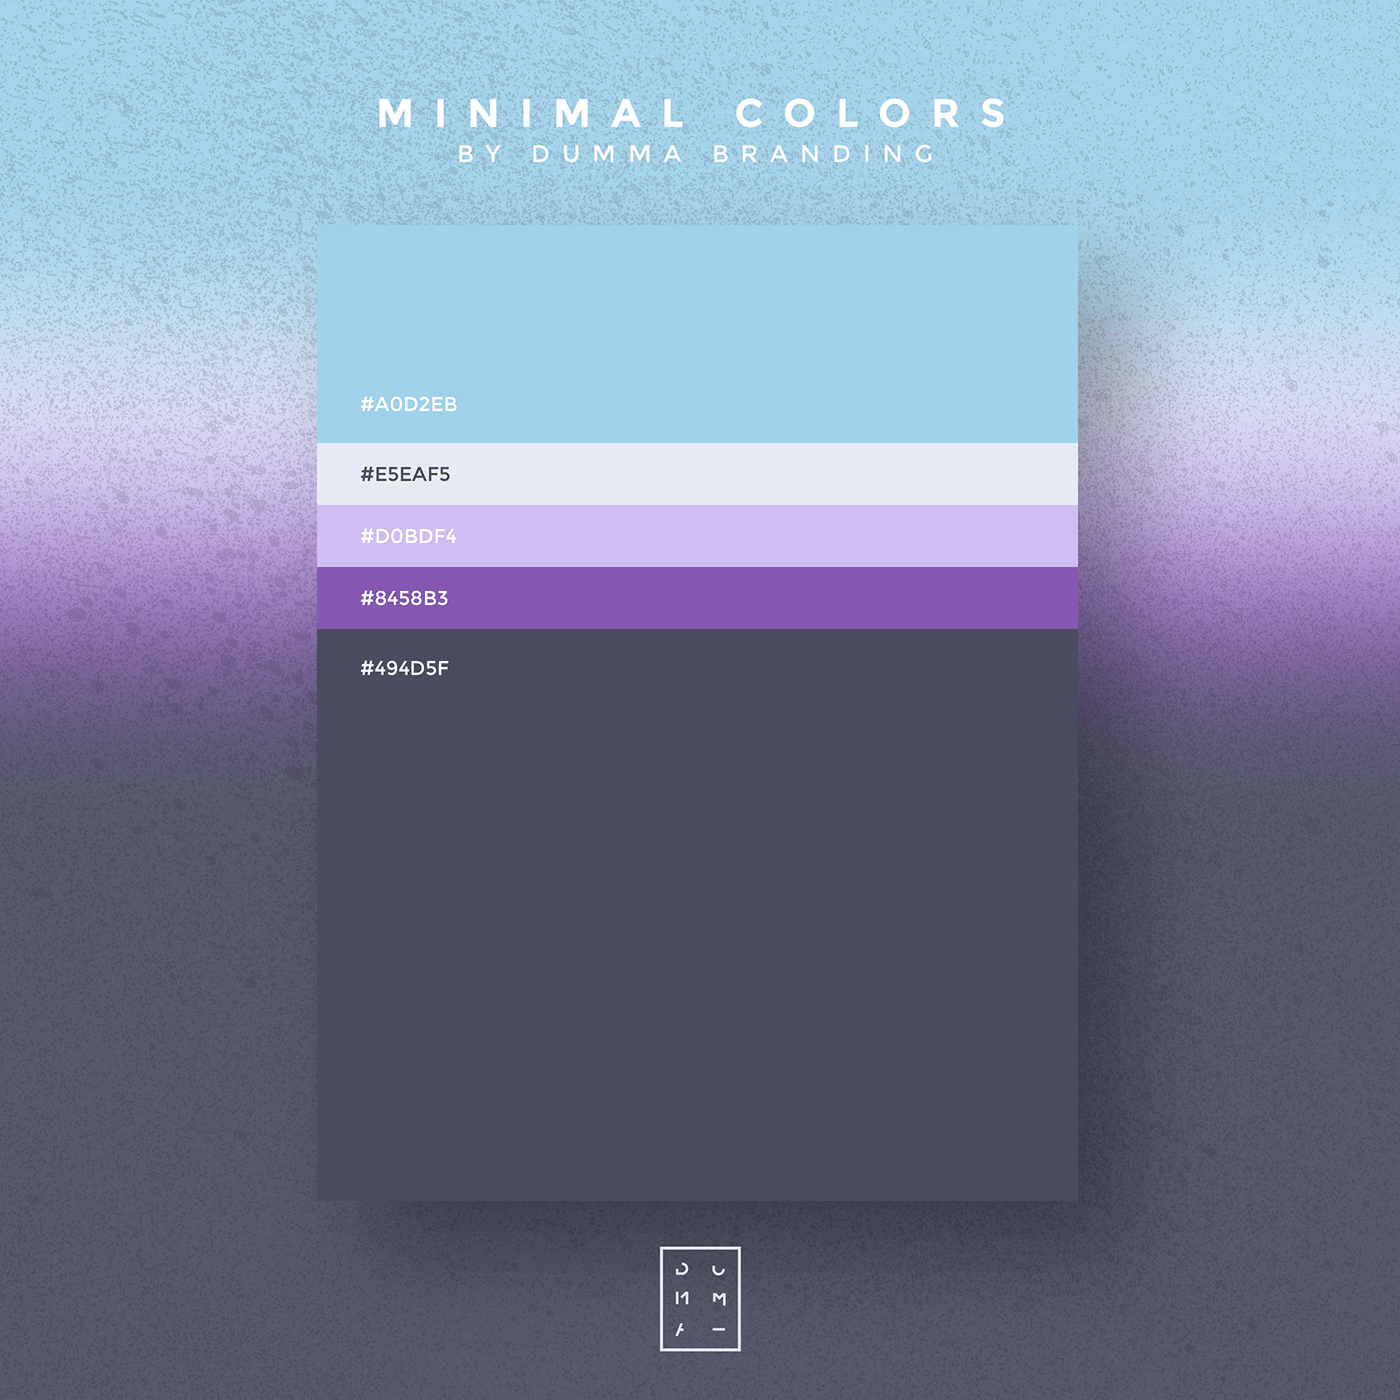 minimalcolors color colortrends colorLOVERS coloroftheday coolcolors